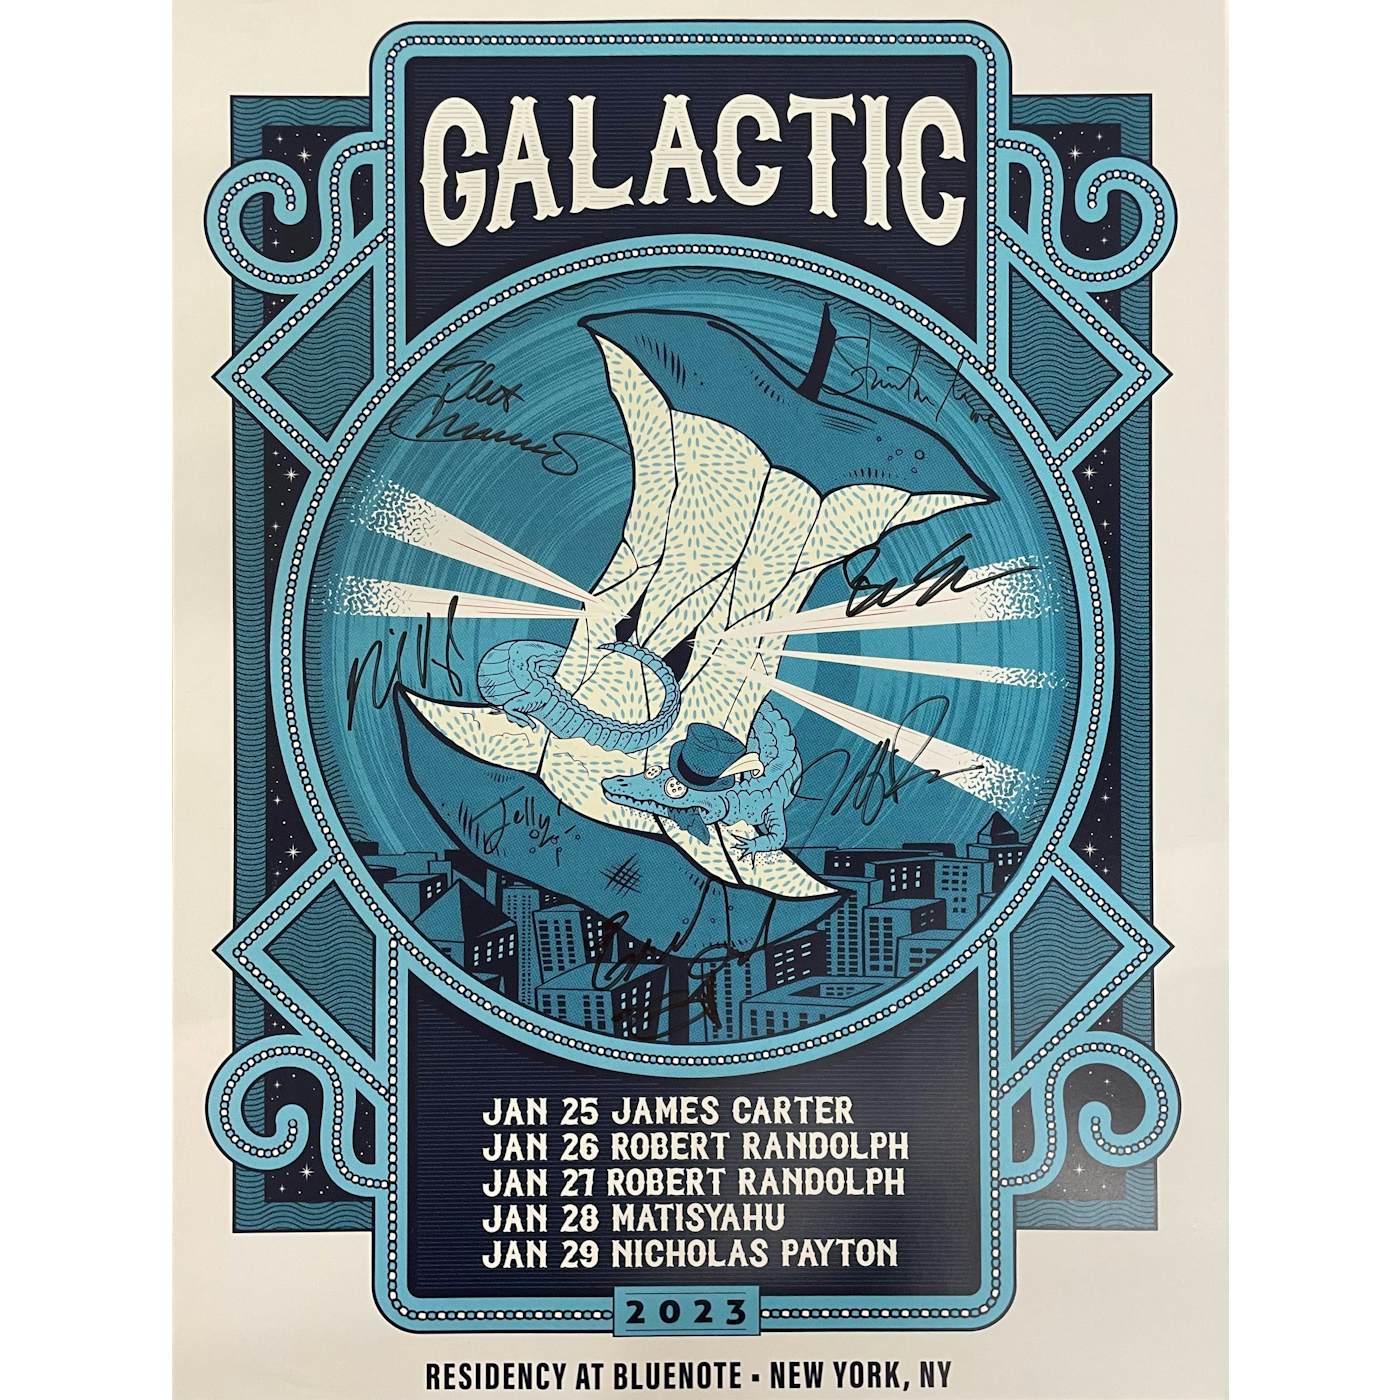 Galactic BLUENOTE NYC 2023 Poster - SIGNED